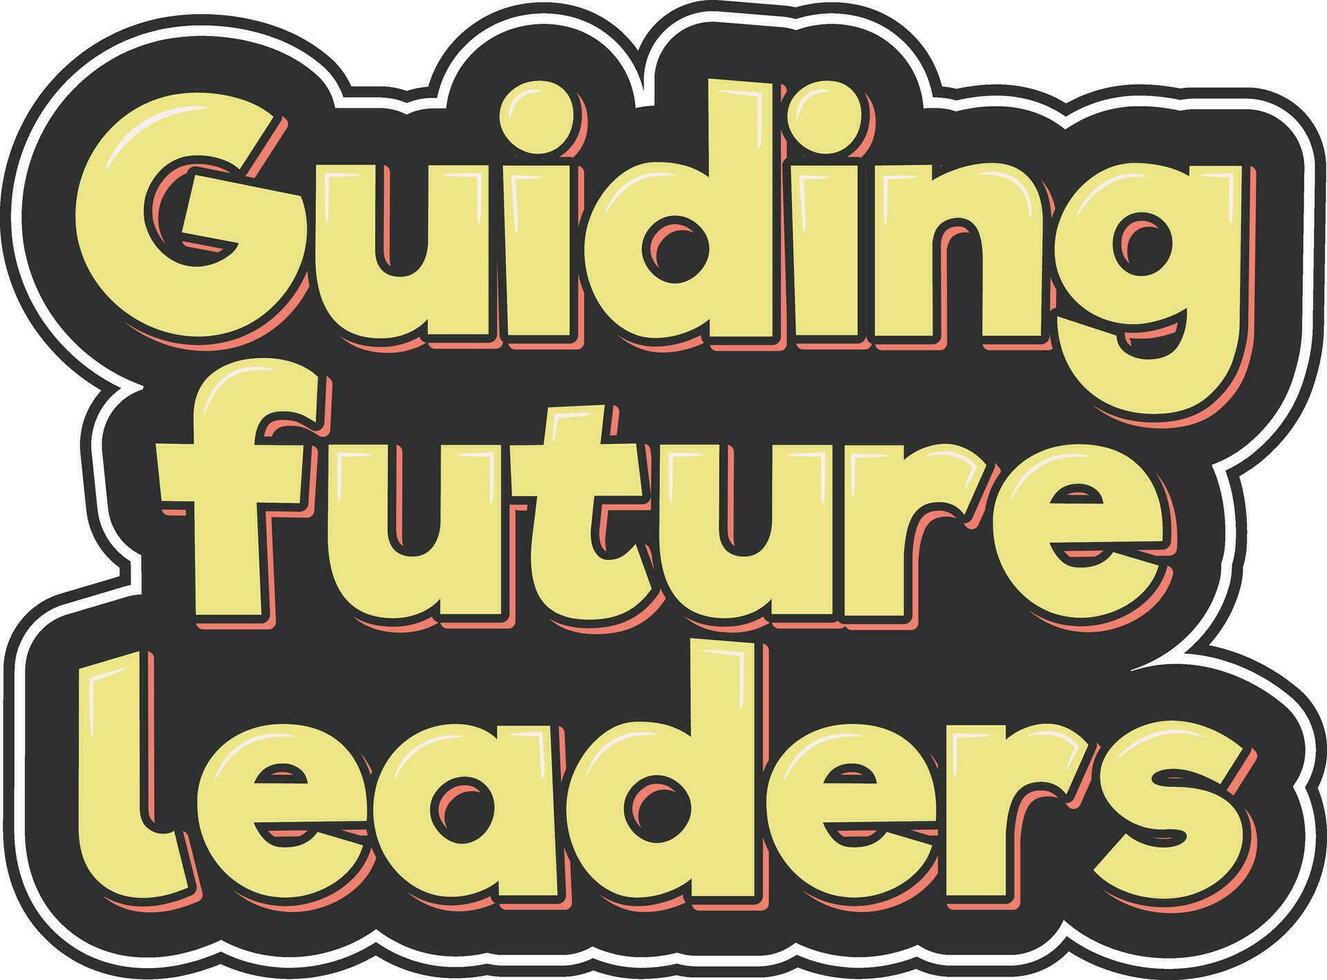 Guiding Future Leaders Typography Design vector